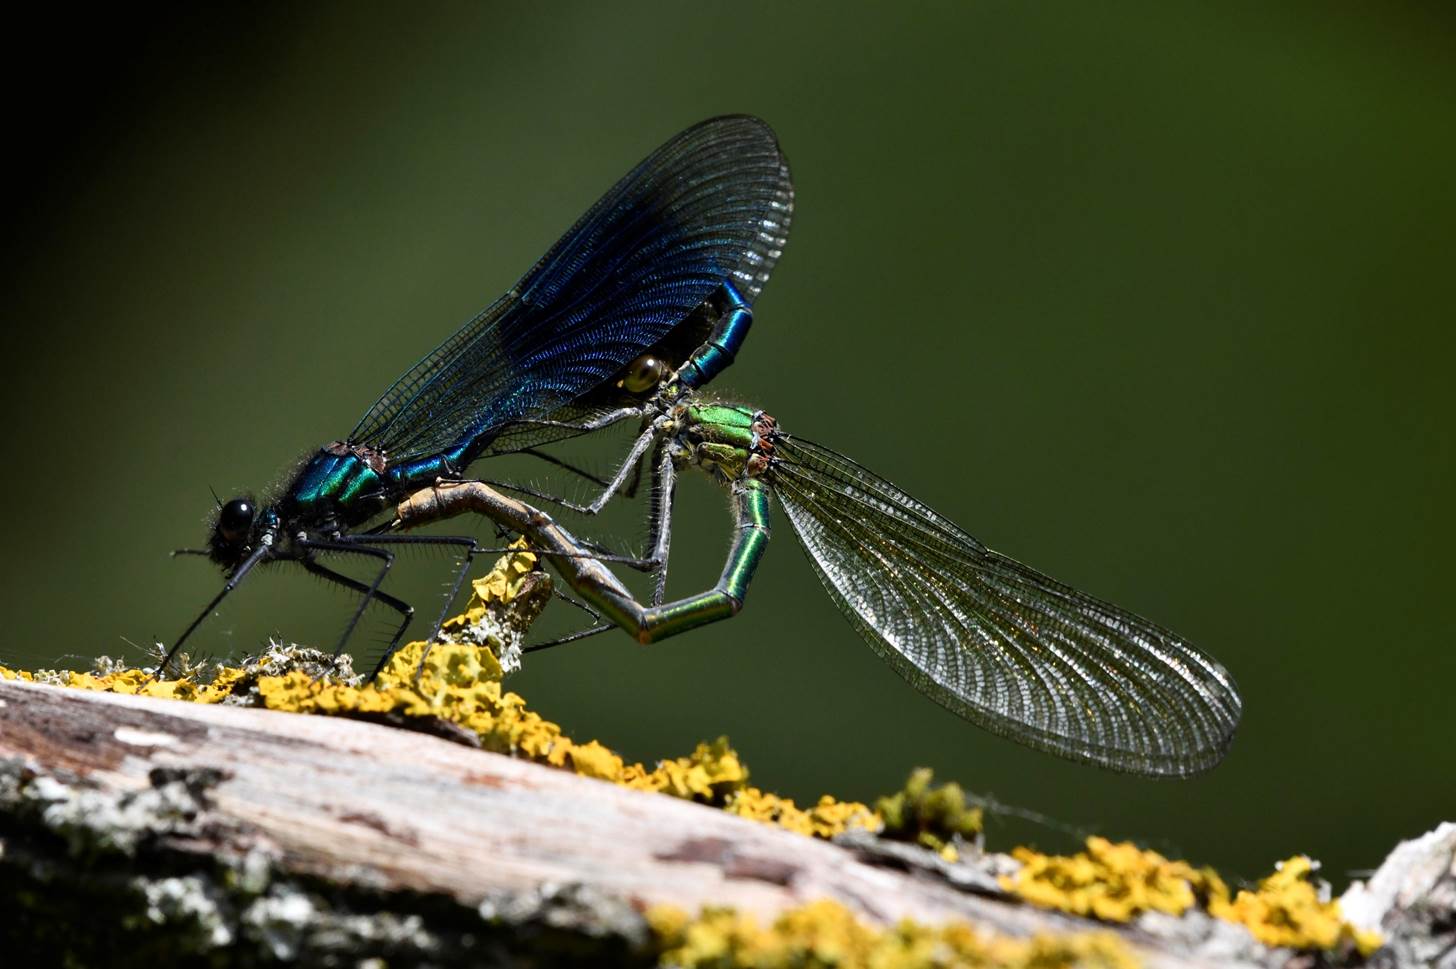 A pair of dragonflies mating on a branch

Description automatically generated